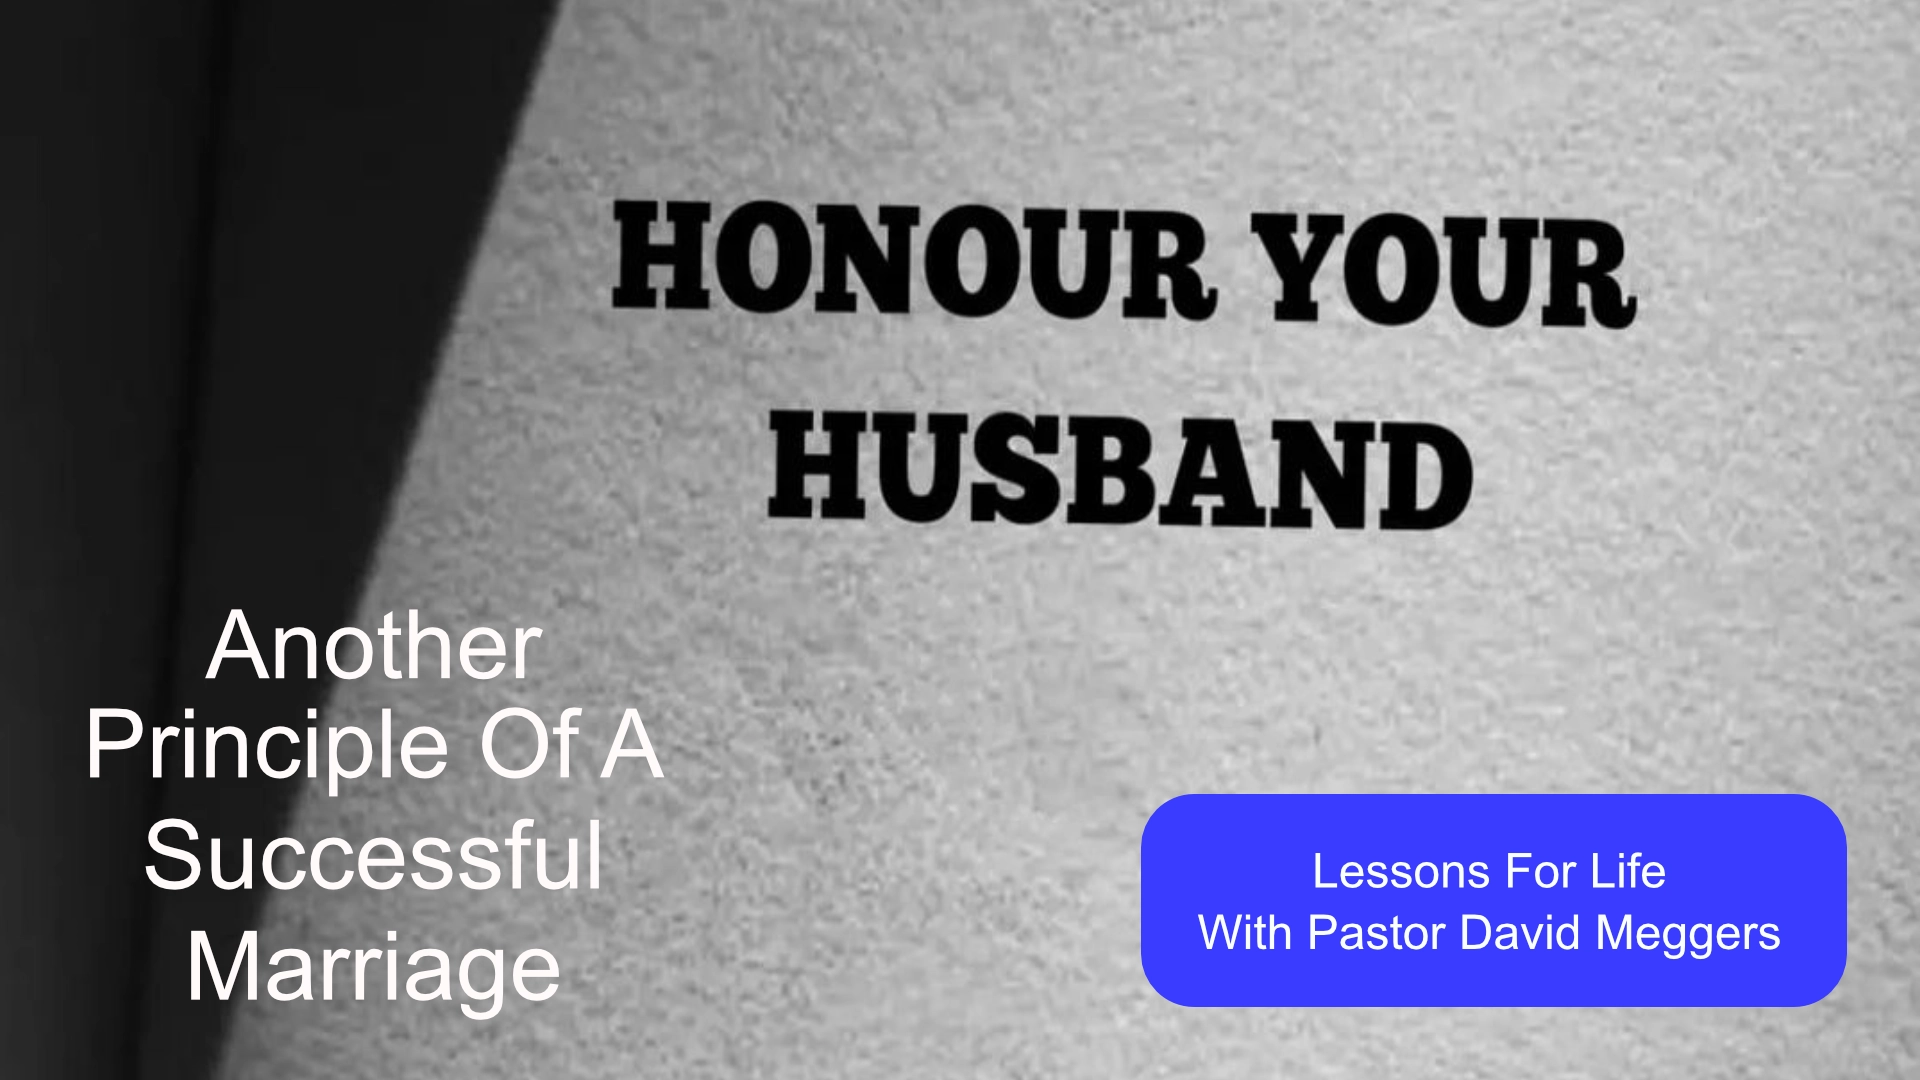 Honour your wife